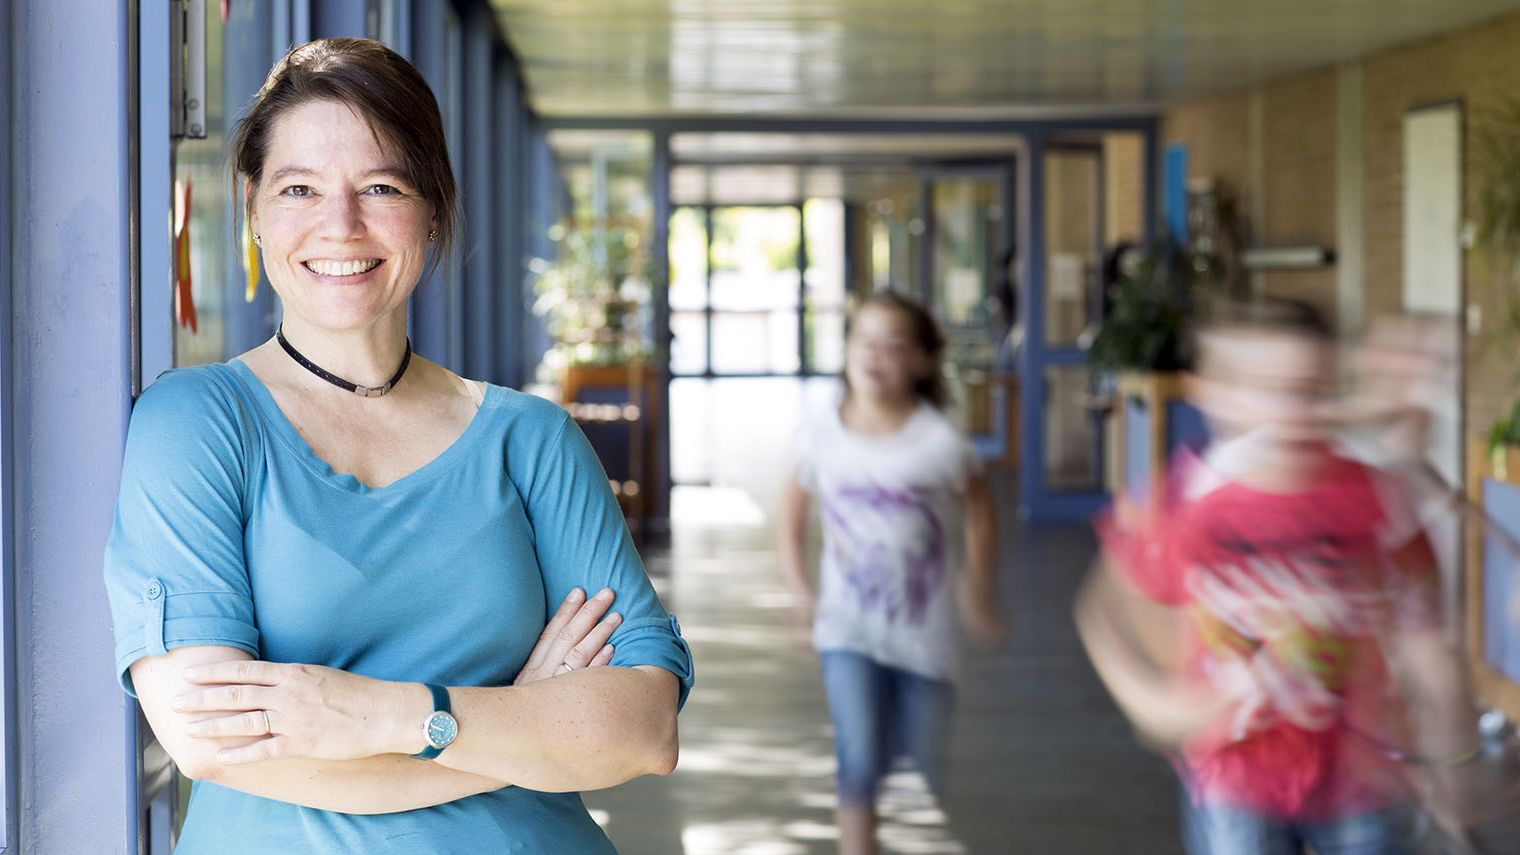 A female teacher stands in a school hallway, she smiles at the camera, her arms are crossed. Children are running in the background.